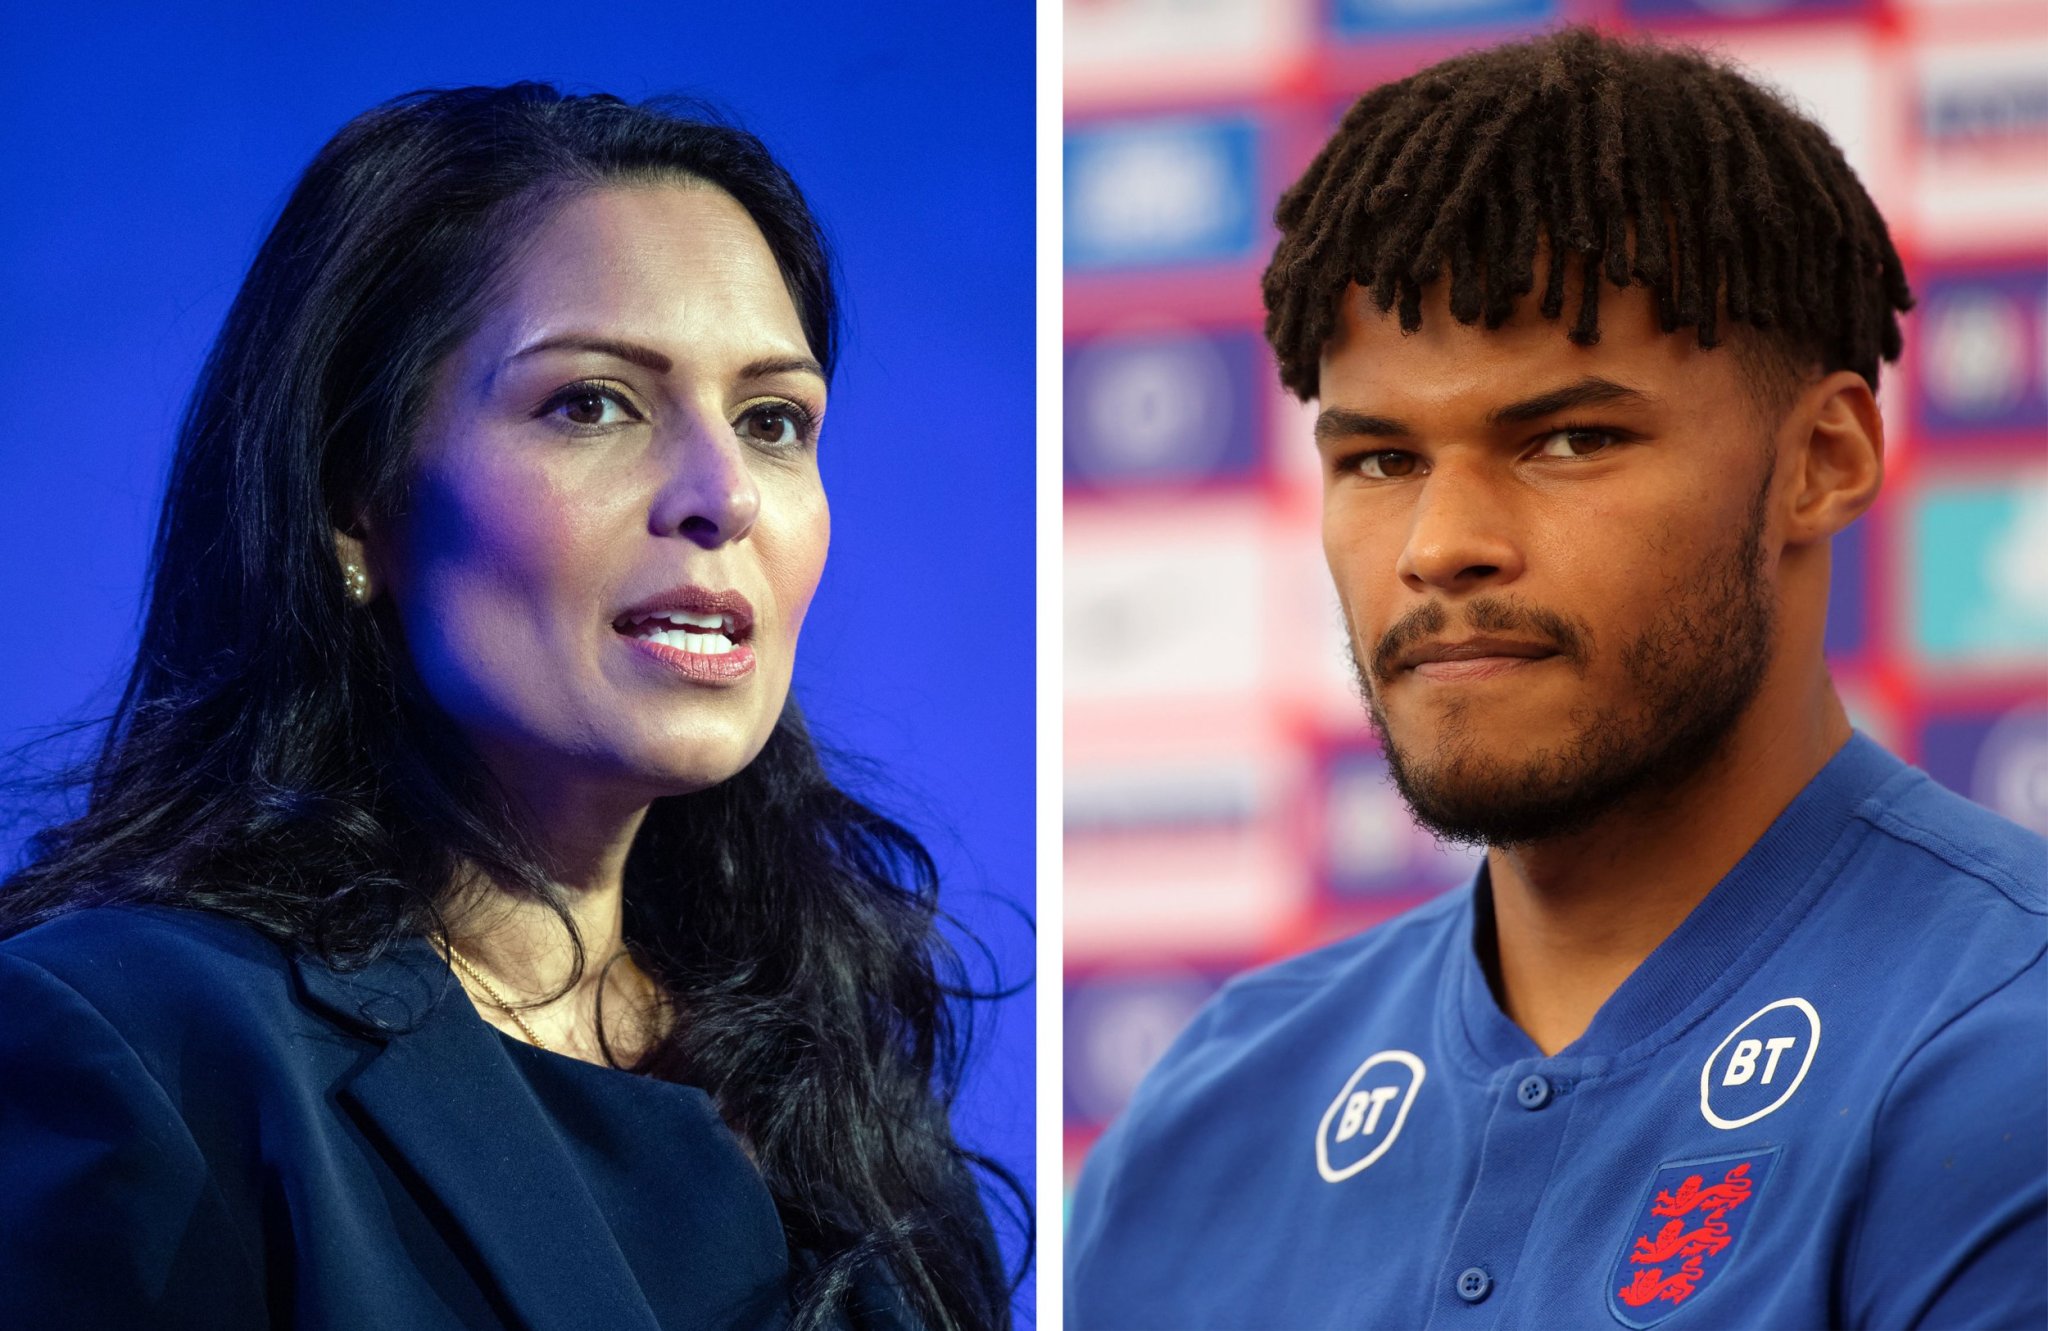 Priti Patel and other Tories are roundly losing the culture war around racism in football